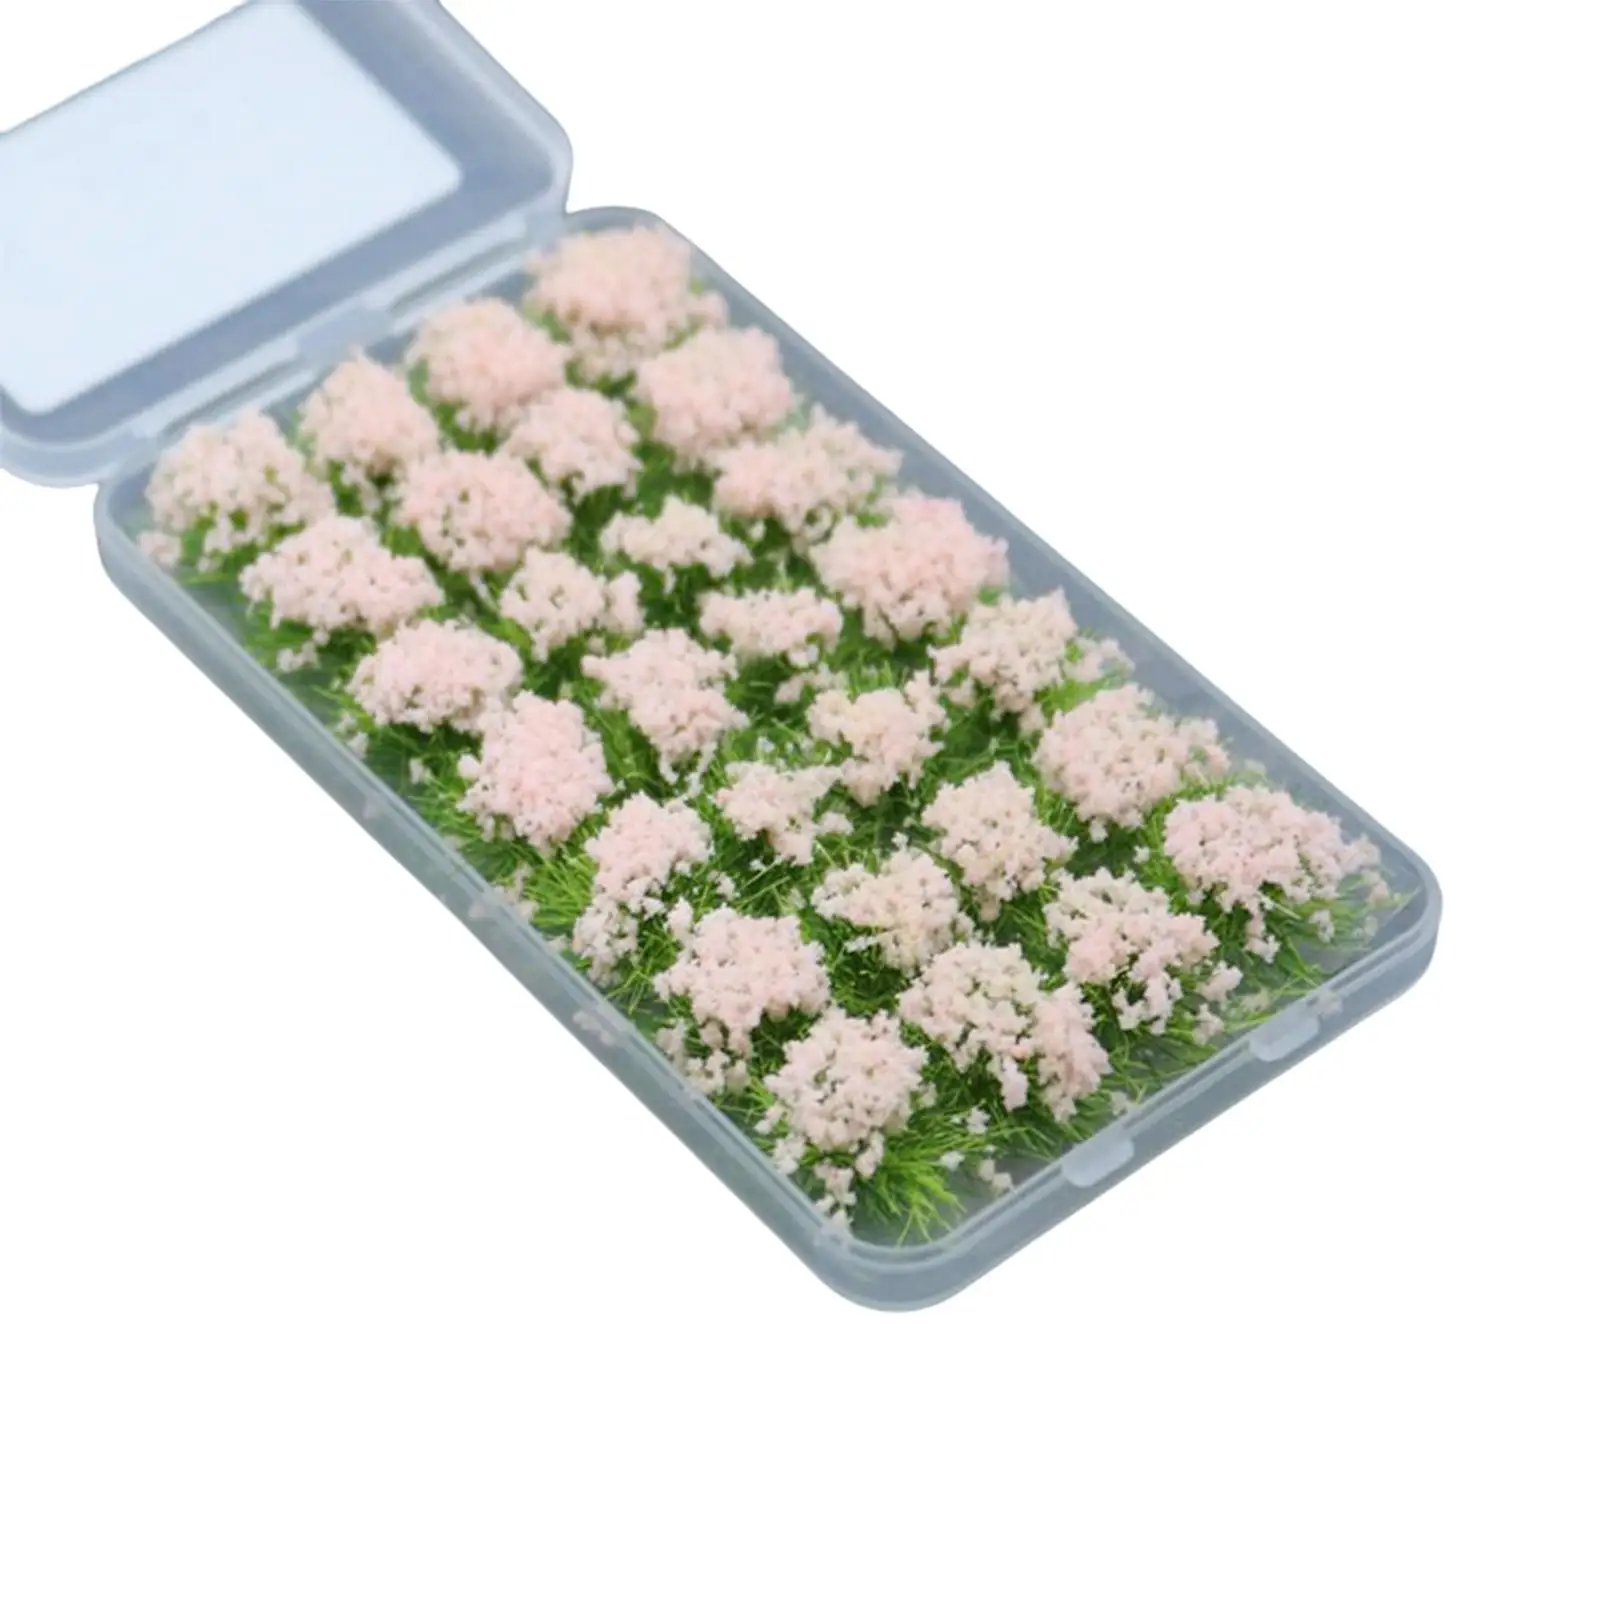 Miniature Flower Cluster DIY Static Scenery Bushy Tufts Green Plant for Railroad Scenery Wargames Layout 1:35 1:48 1:72 1:87